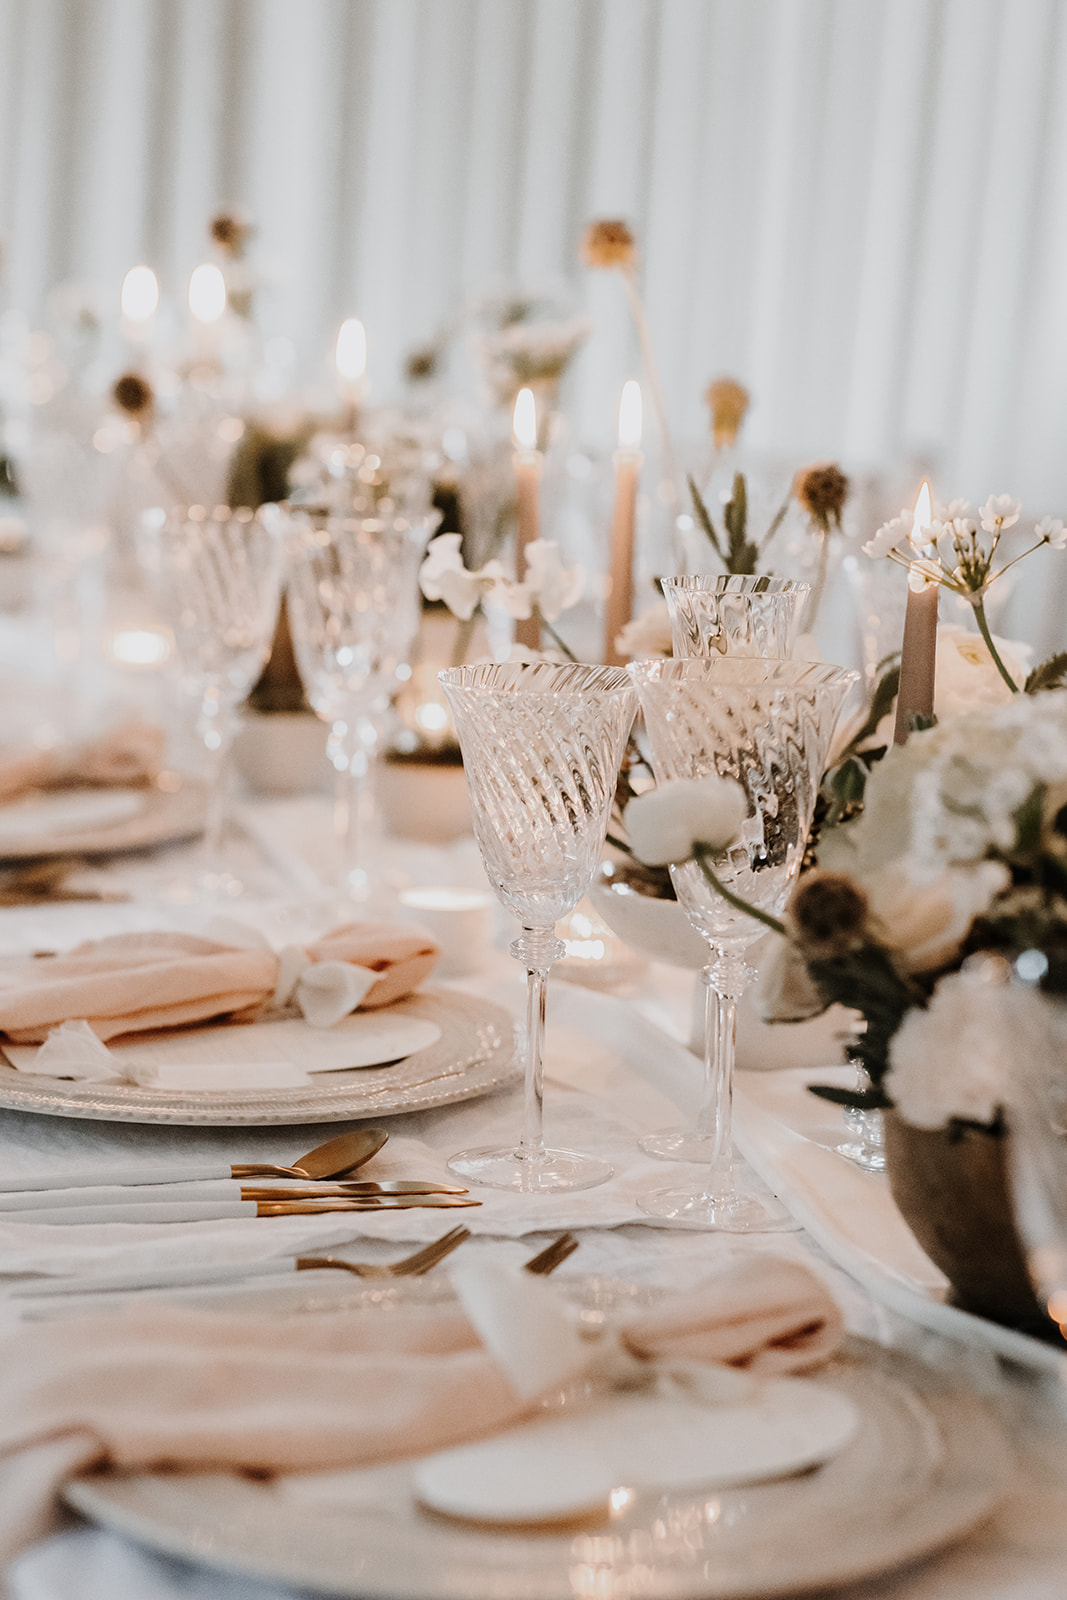 Spring inspired wedding tablescape with blush napkins, elegant stationery, floral arrangements, candles, sugar biscuit favours and blush draping fabric sails | Louise Hayes Cake Design | Melissa Megan Photography | Cowdray Wedding